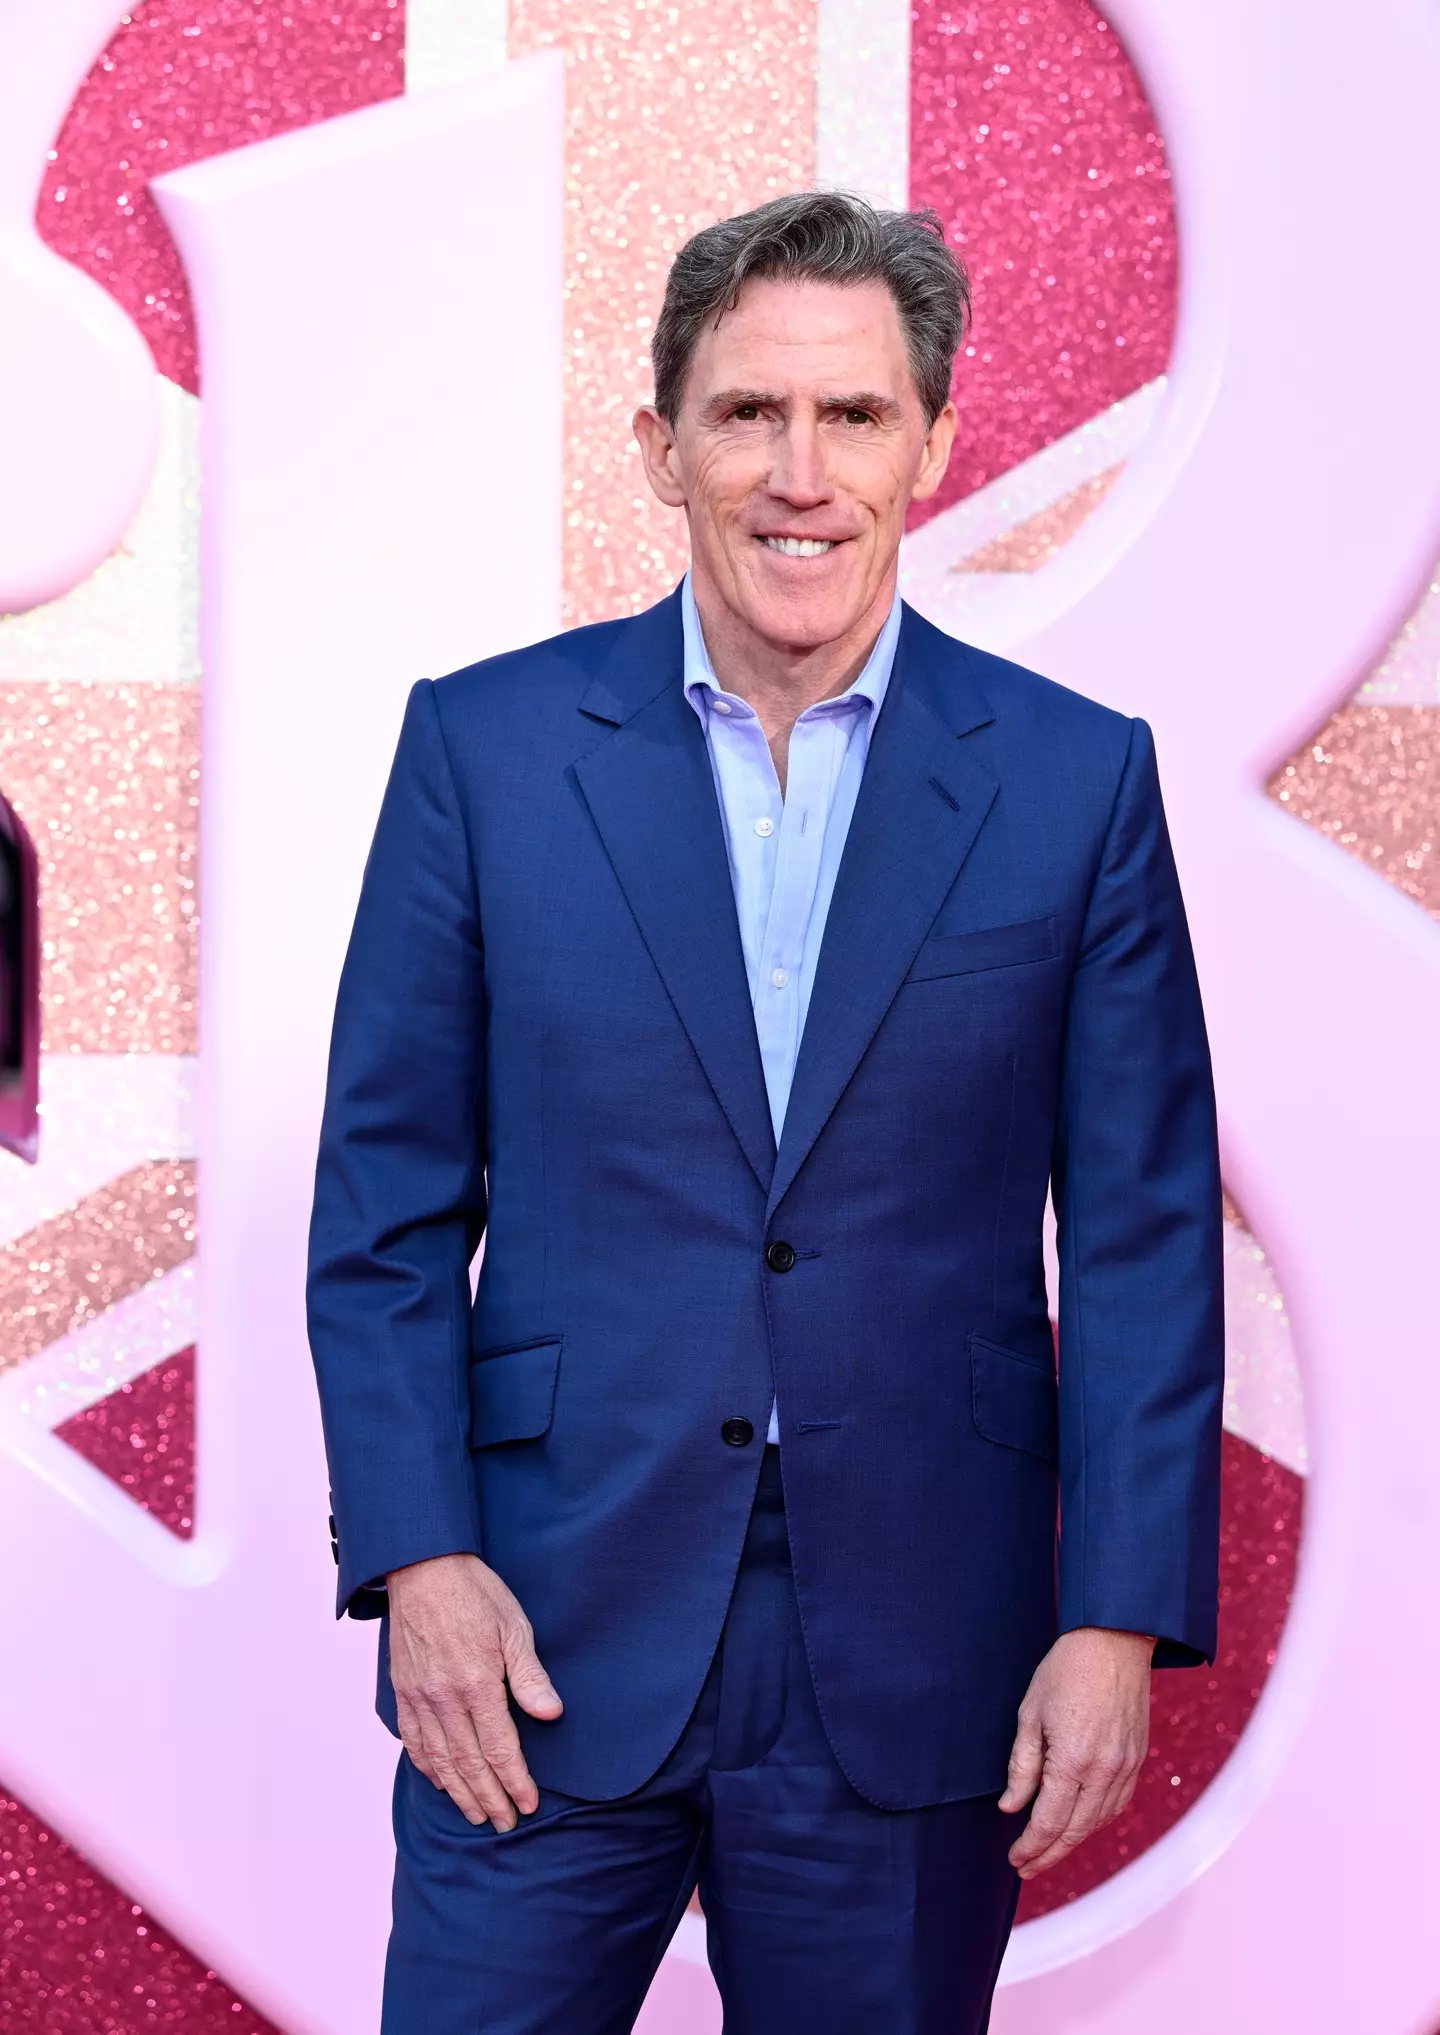 Barbie fans are obsessed with Rob Brydon's Barbie cameo.